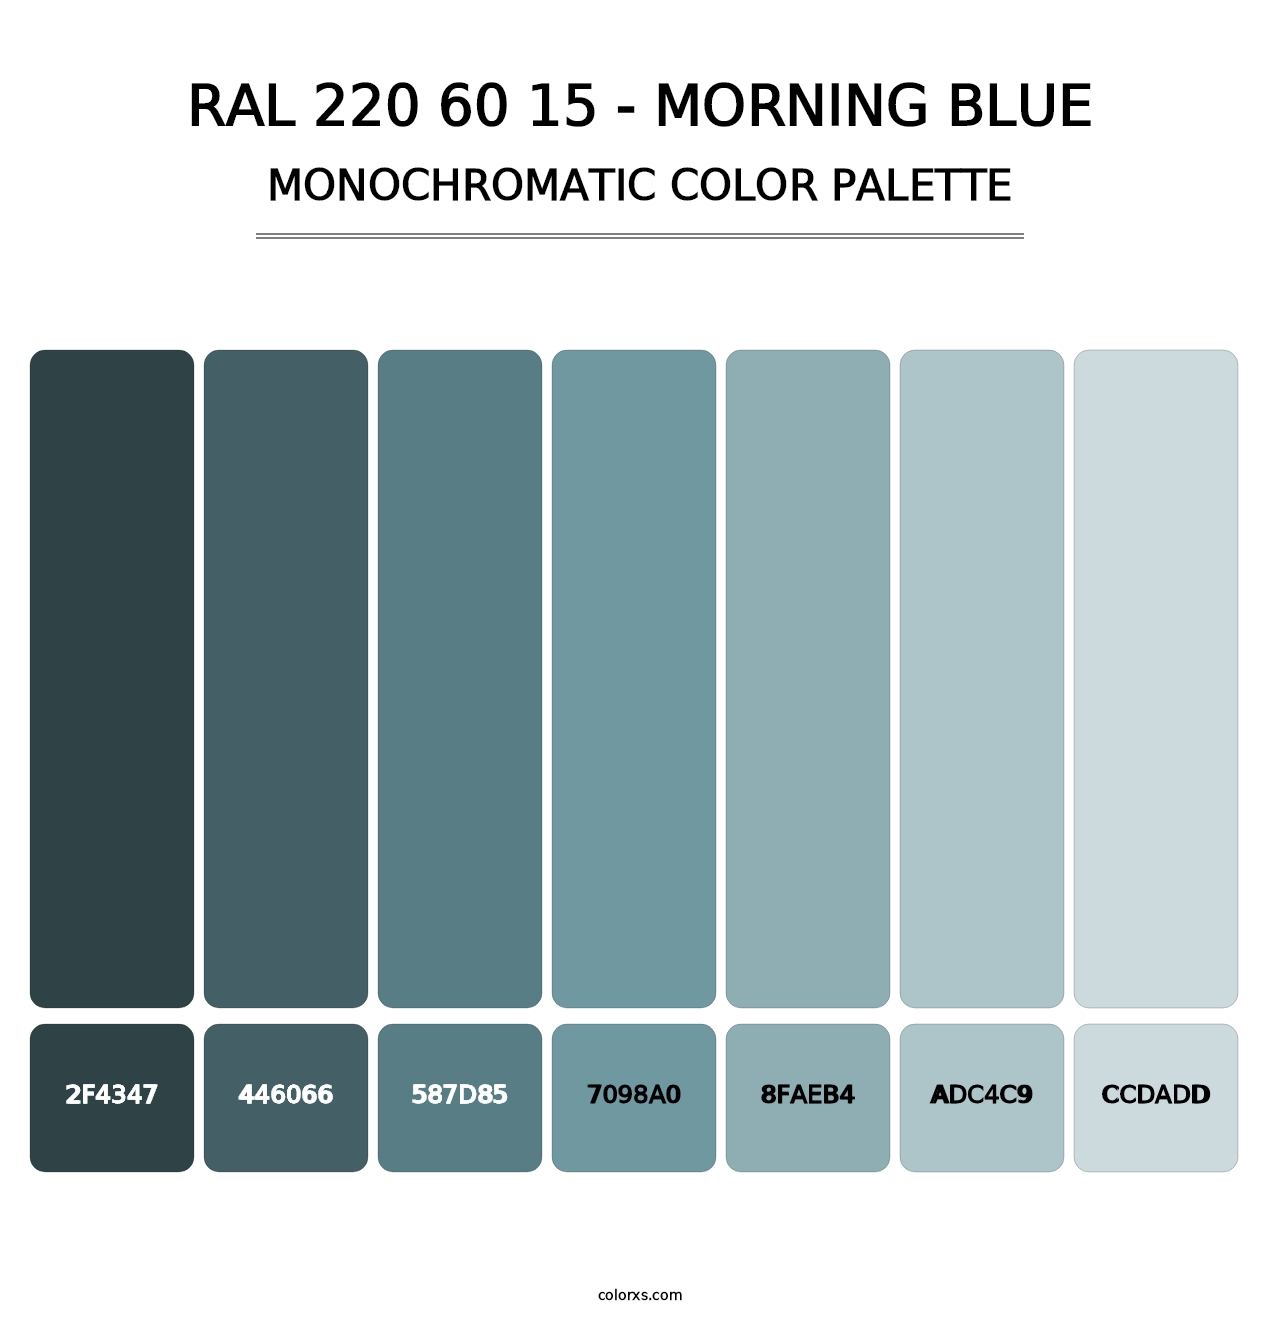 RAL 220 60 15 - Morning Blue - Monochromatic Color Palette